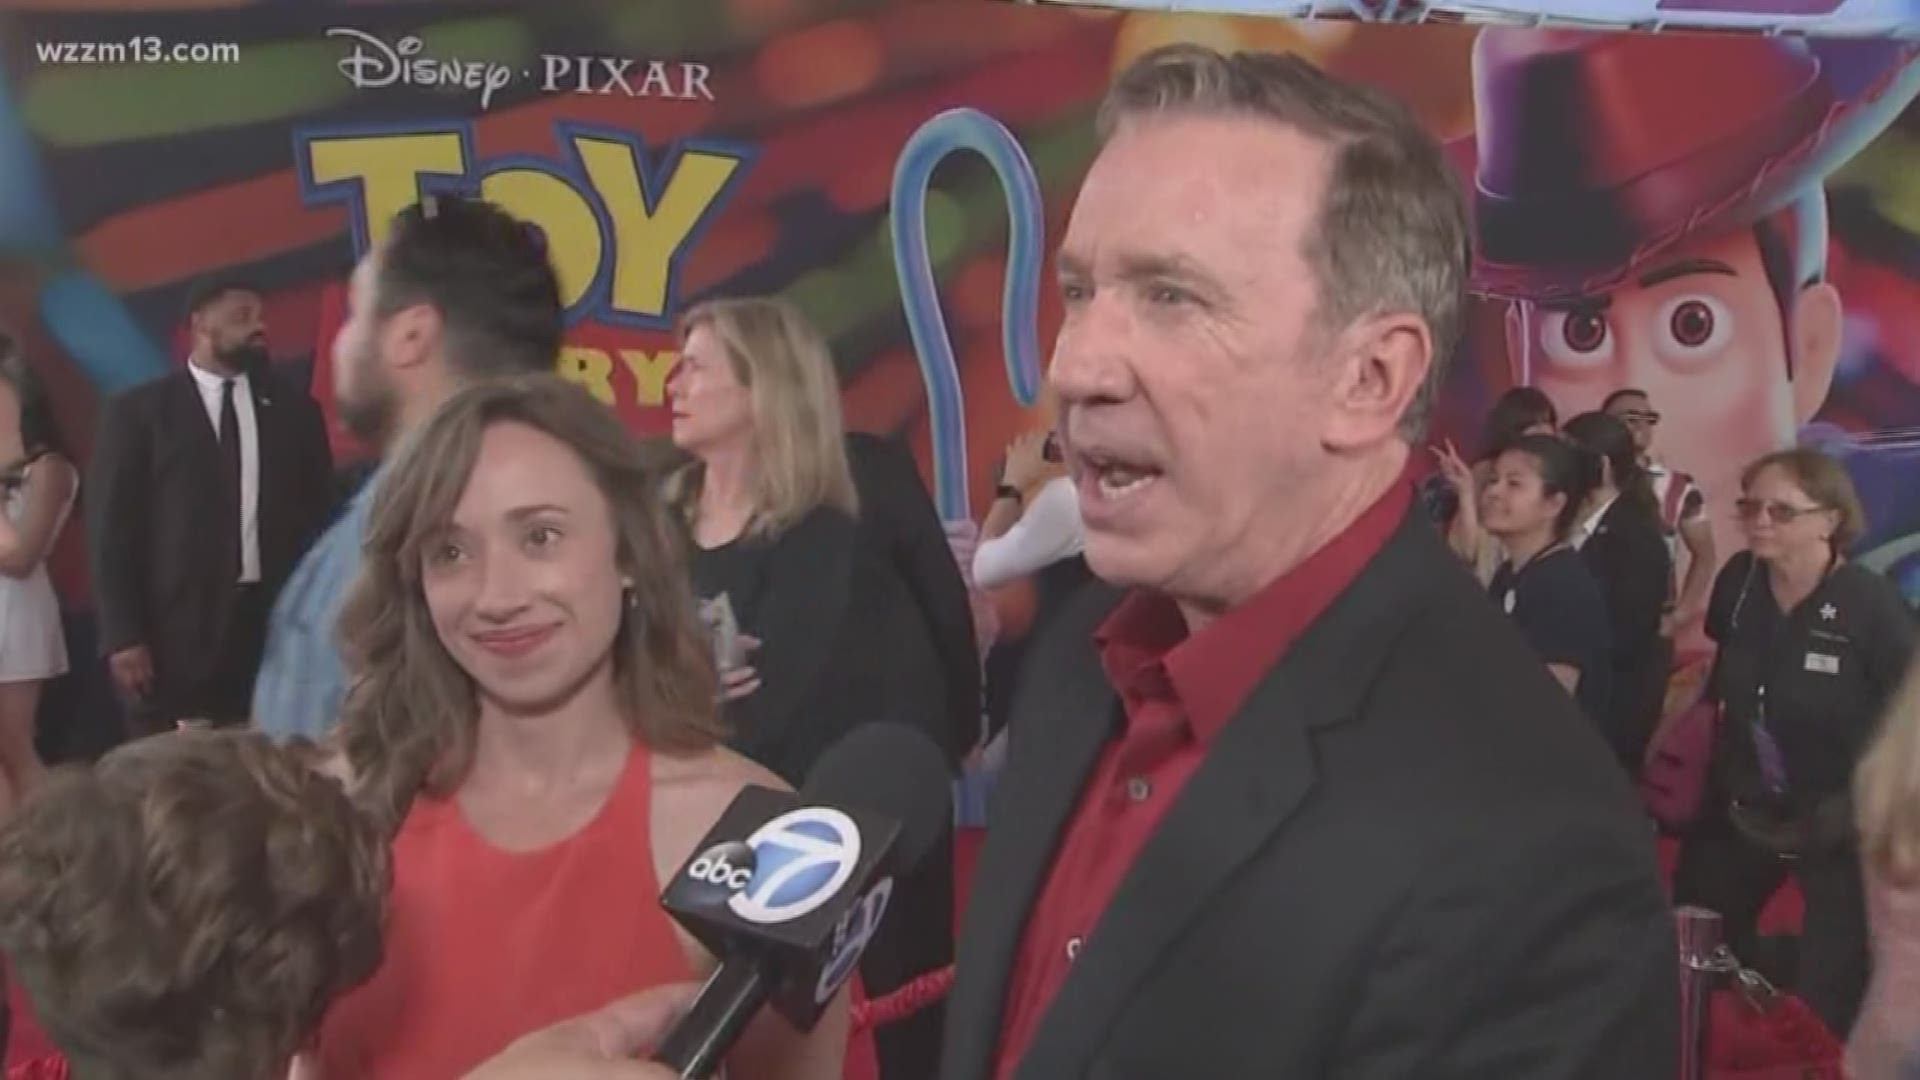 Tim Allen was in Hollywood at the Toy Story 4 premiere.